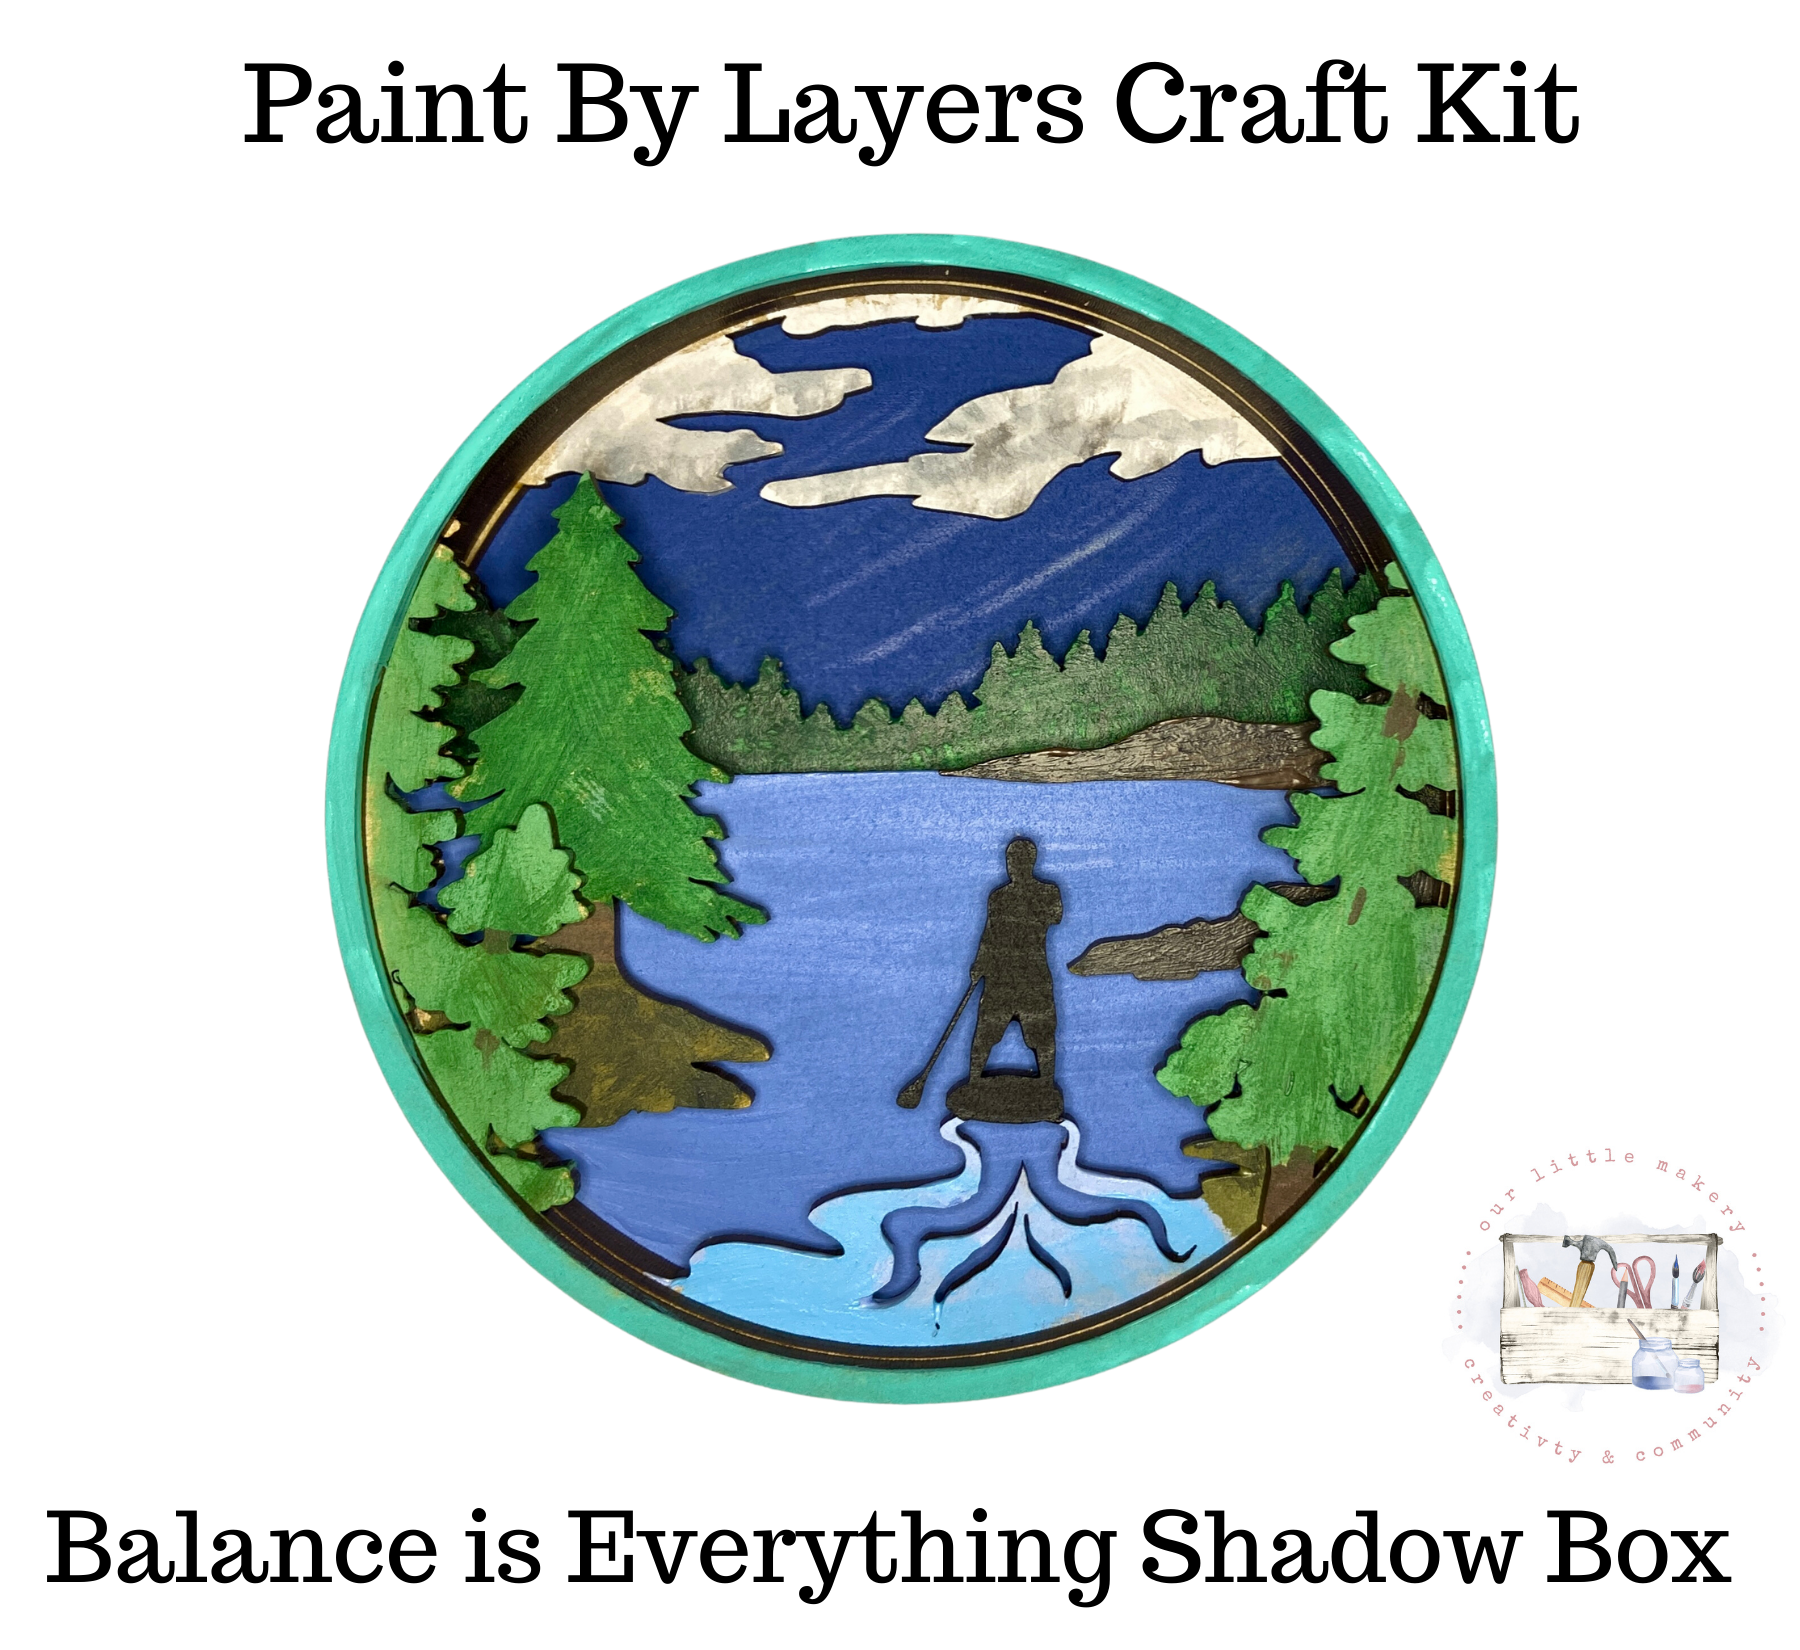 Paint by layers craft kits